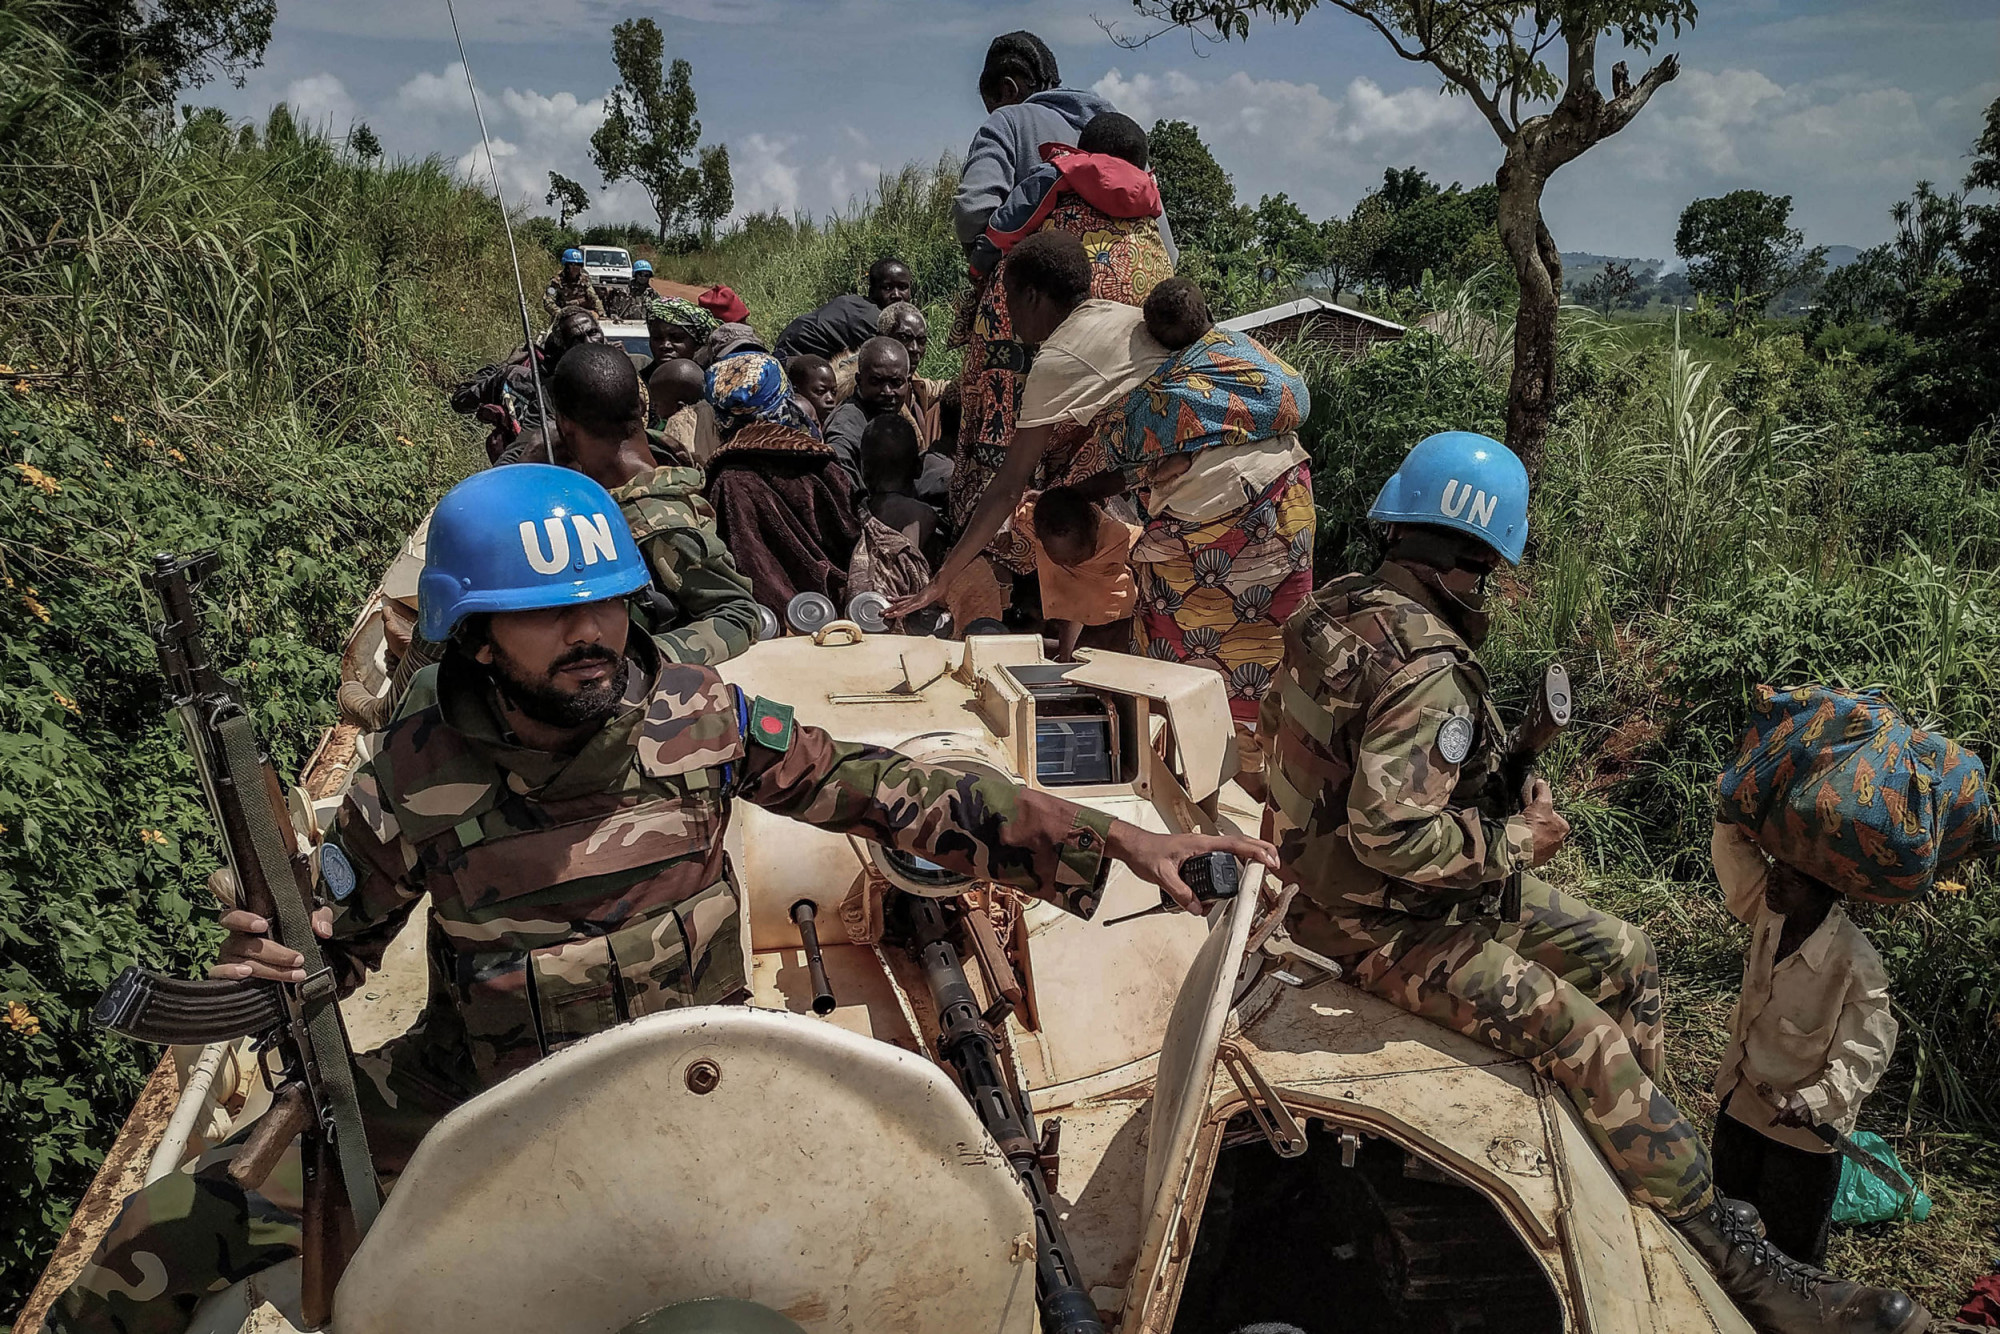 Blukwa, DRC, June 2019. UN peacekeepers assist civilians during the evacuation of the village of Blukwa in Ituri last year after a series of massacres in Djugu territory killed 161 people in early June 2019. Drodro, DRC, June 2019 © From the archive of Dieudonne Dirole for Fondation Carmignac